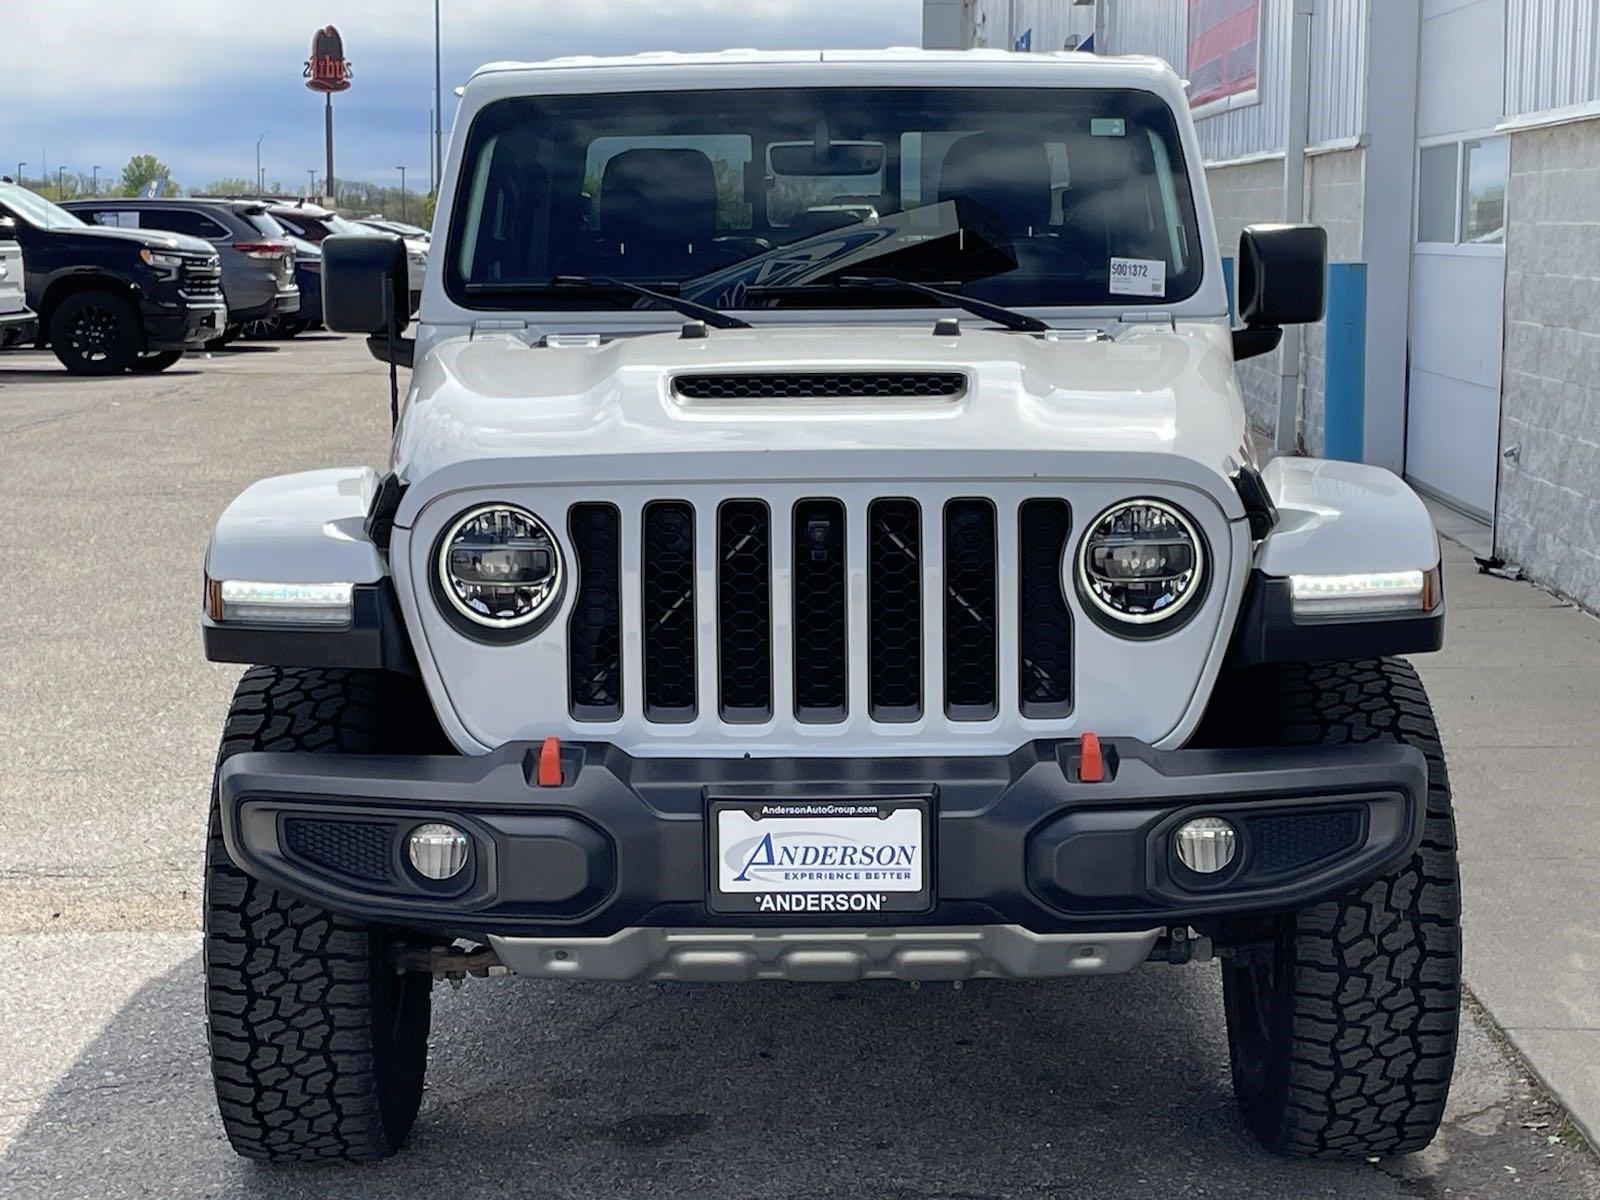 Used 2020 Jeep Gladiator Mojave Crew Cab Truck for sale in Lincoln NE